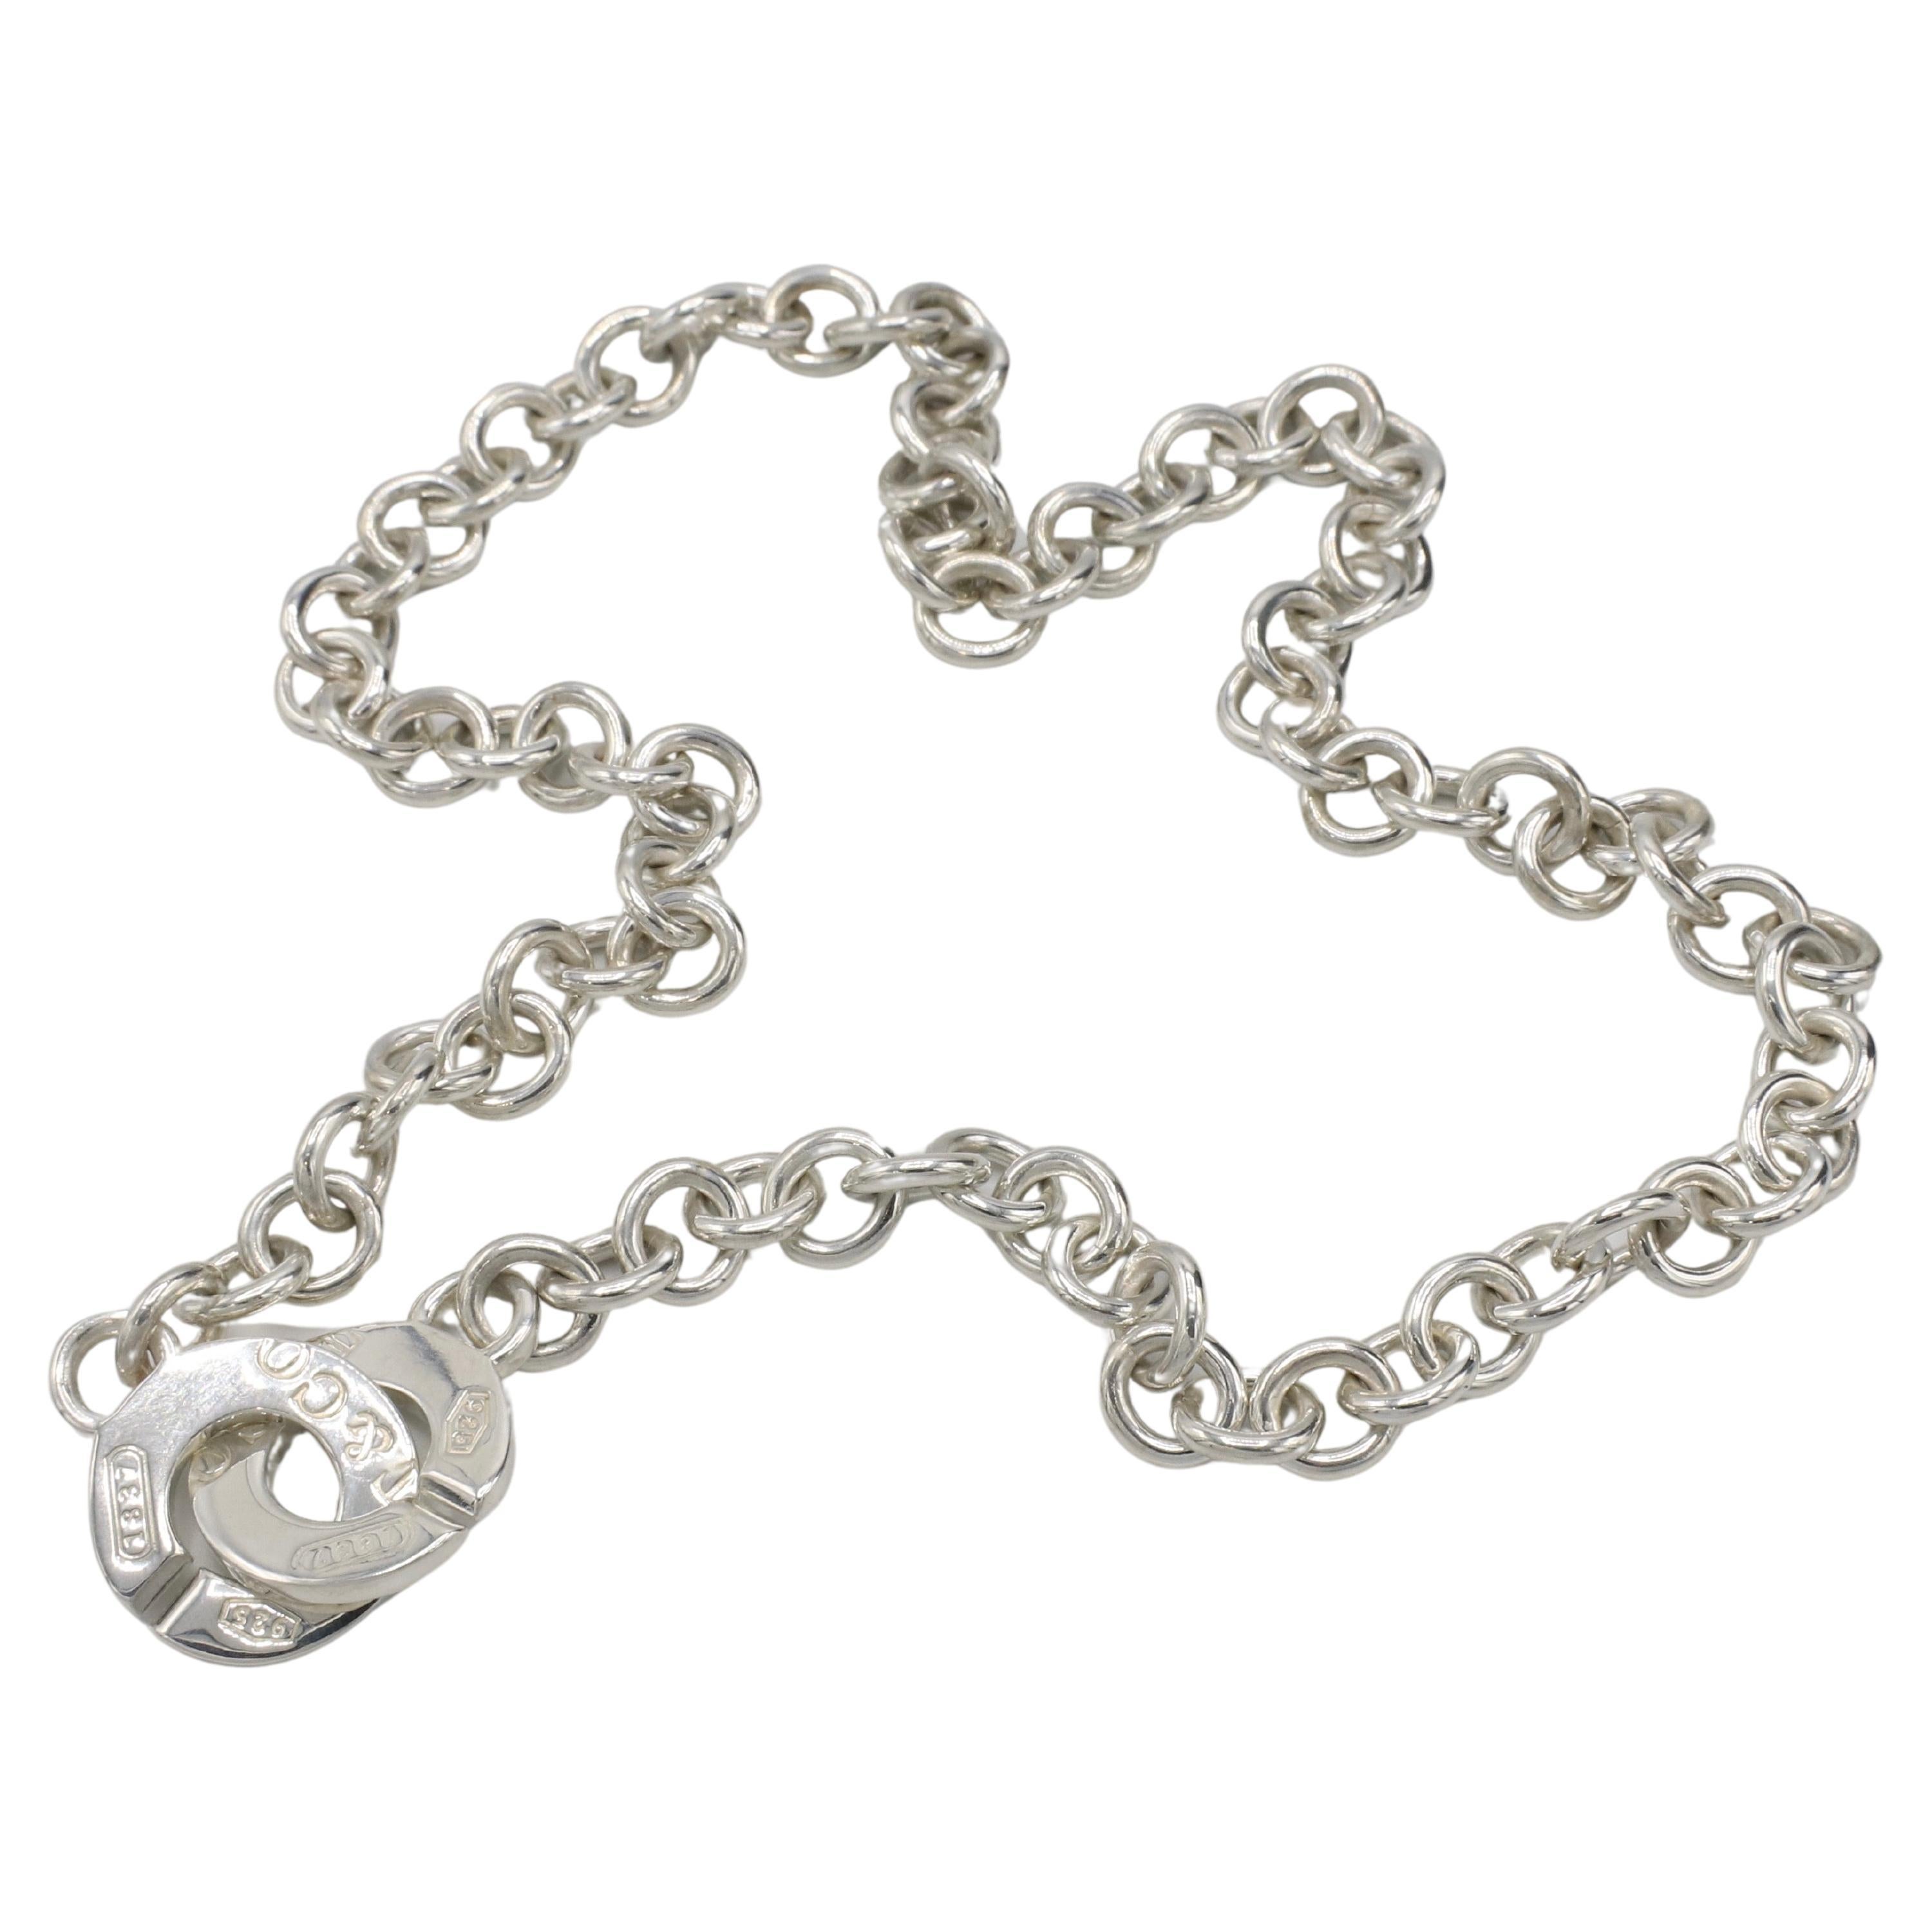 Tiffany & Co. Sterling Silver Chain Link 1837 Circle Clasp Necklace 
Metal: Sterling silver 925
Weight: 47 grams
Links: 7.5 x 8.5mm
Length: 17 inches
